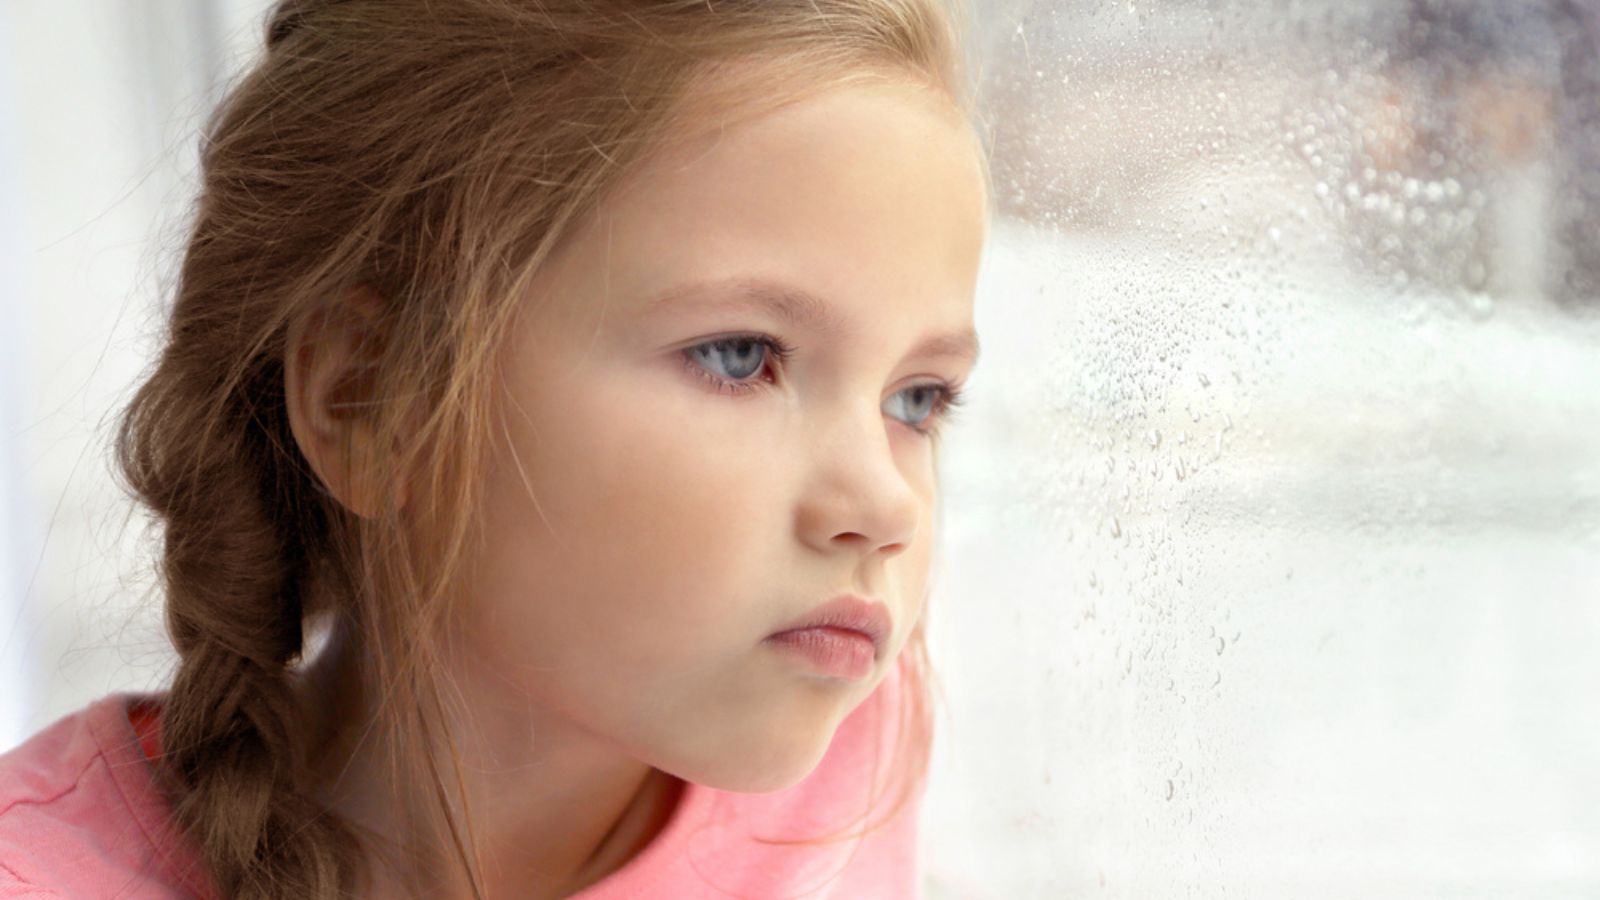 Sad little girl looking out of window